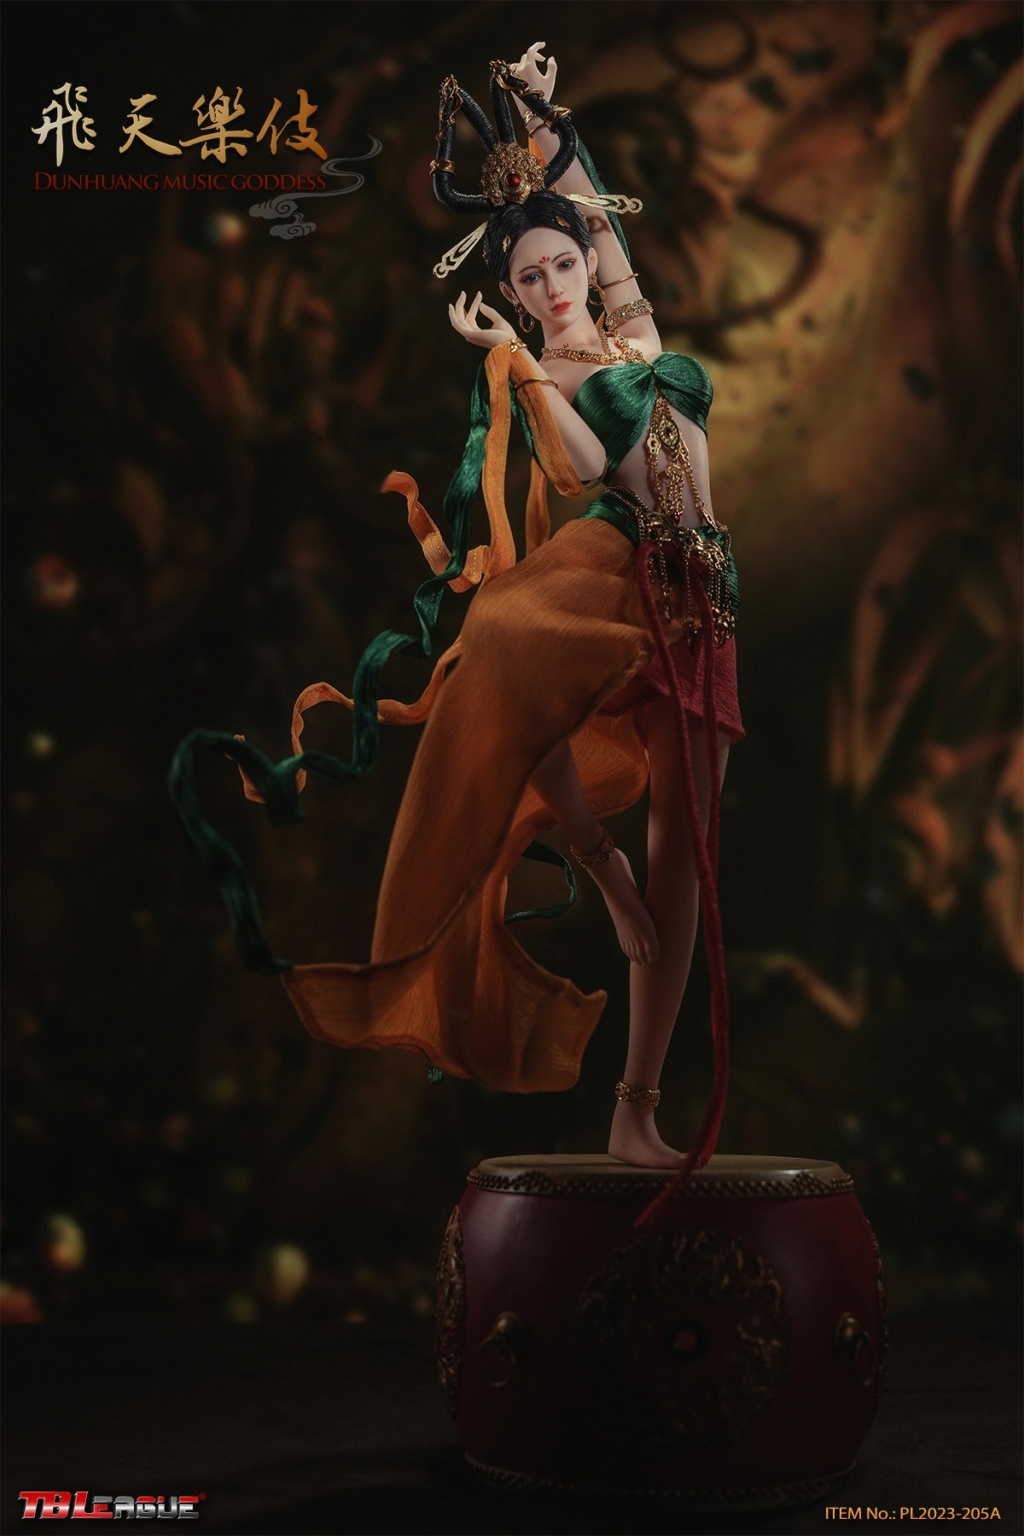 MusicGoddess - NEW PRODUCT: TBLeague: PL2023-205 1/6 Scale Dunhuang Music Goddess (2 versions) 15115110